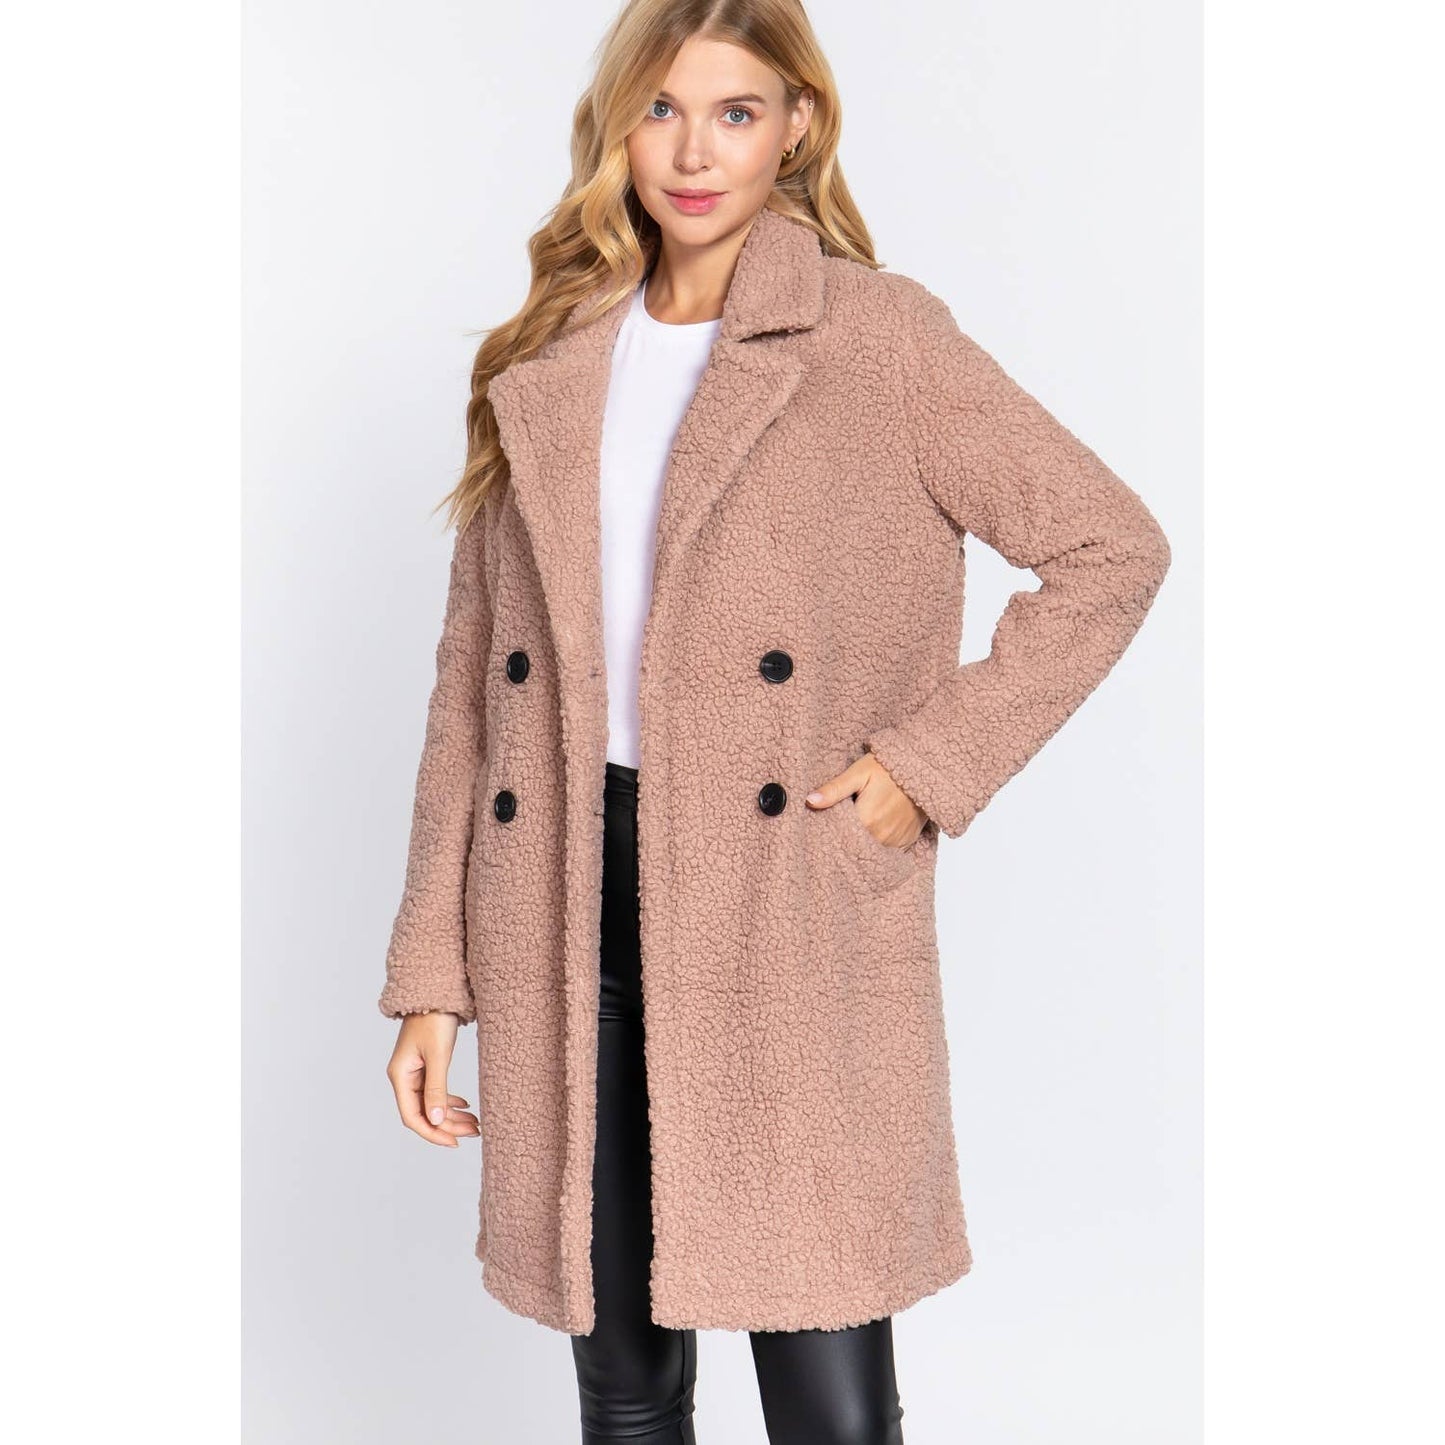 DOUBLE BREASTED FAUX FUR TEDDY COAT: PINK MAUVE / L